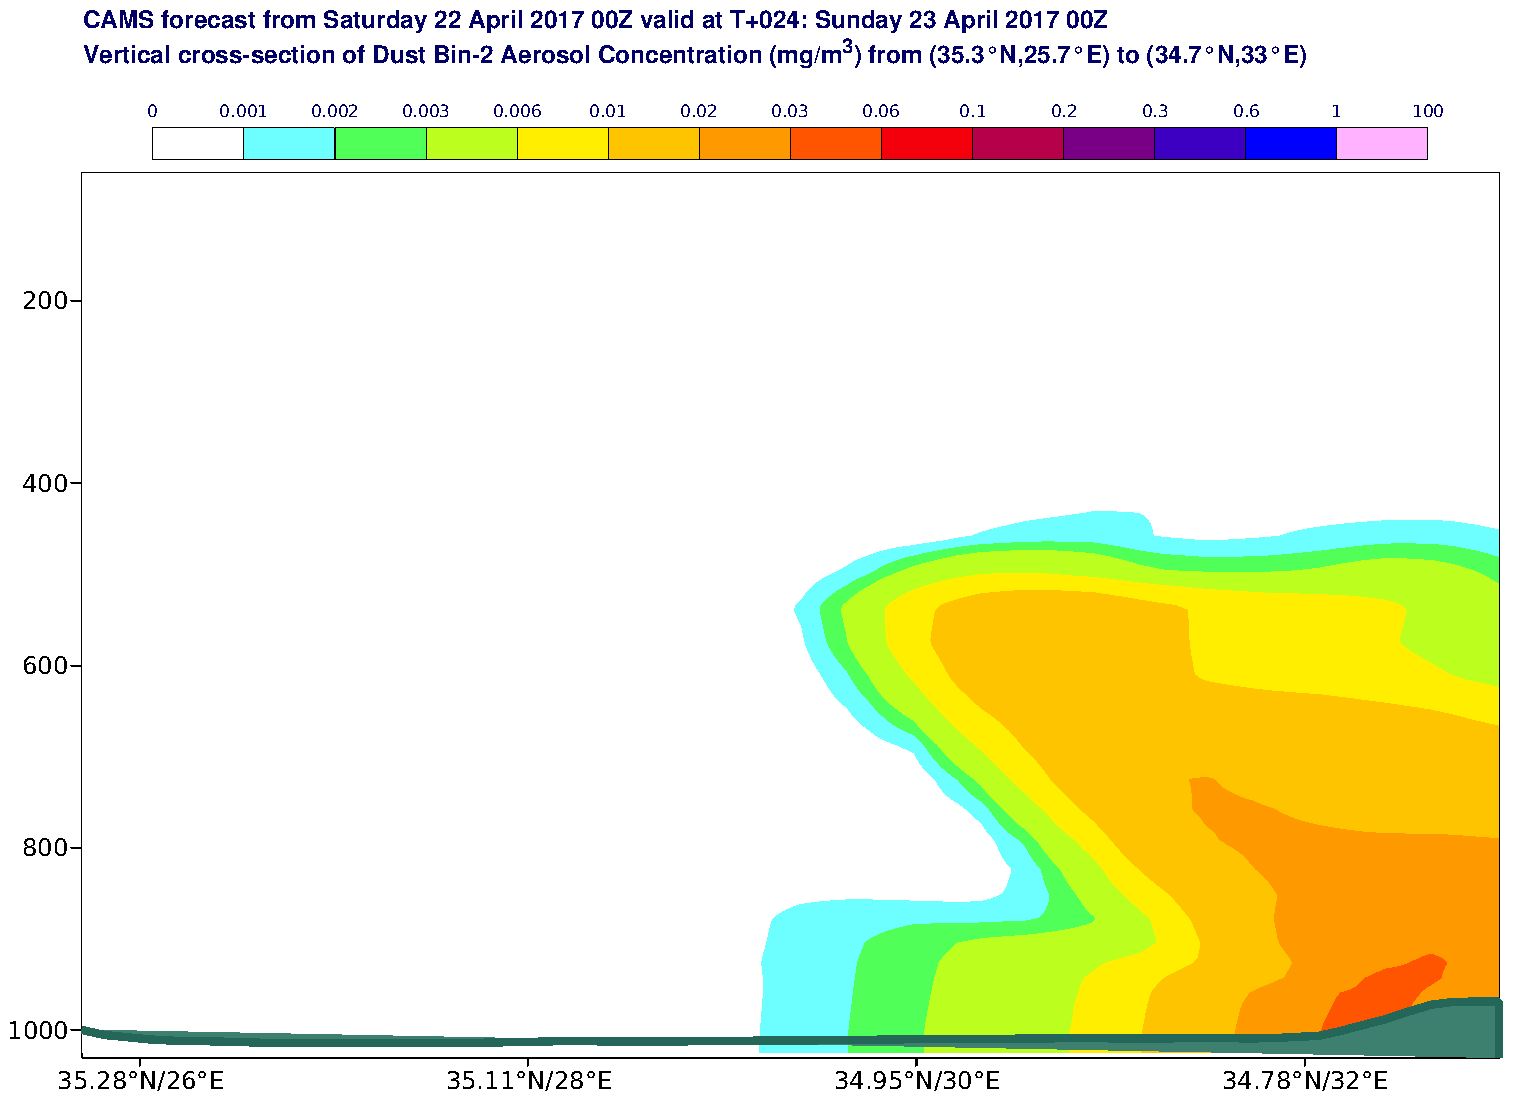 Vertical cross-section of Dust Bin-2 Aerosol Concentration (mg/m3) valid at T24 - 2017-04-23 00:00